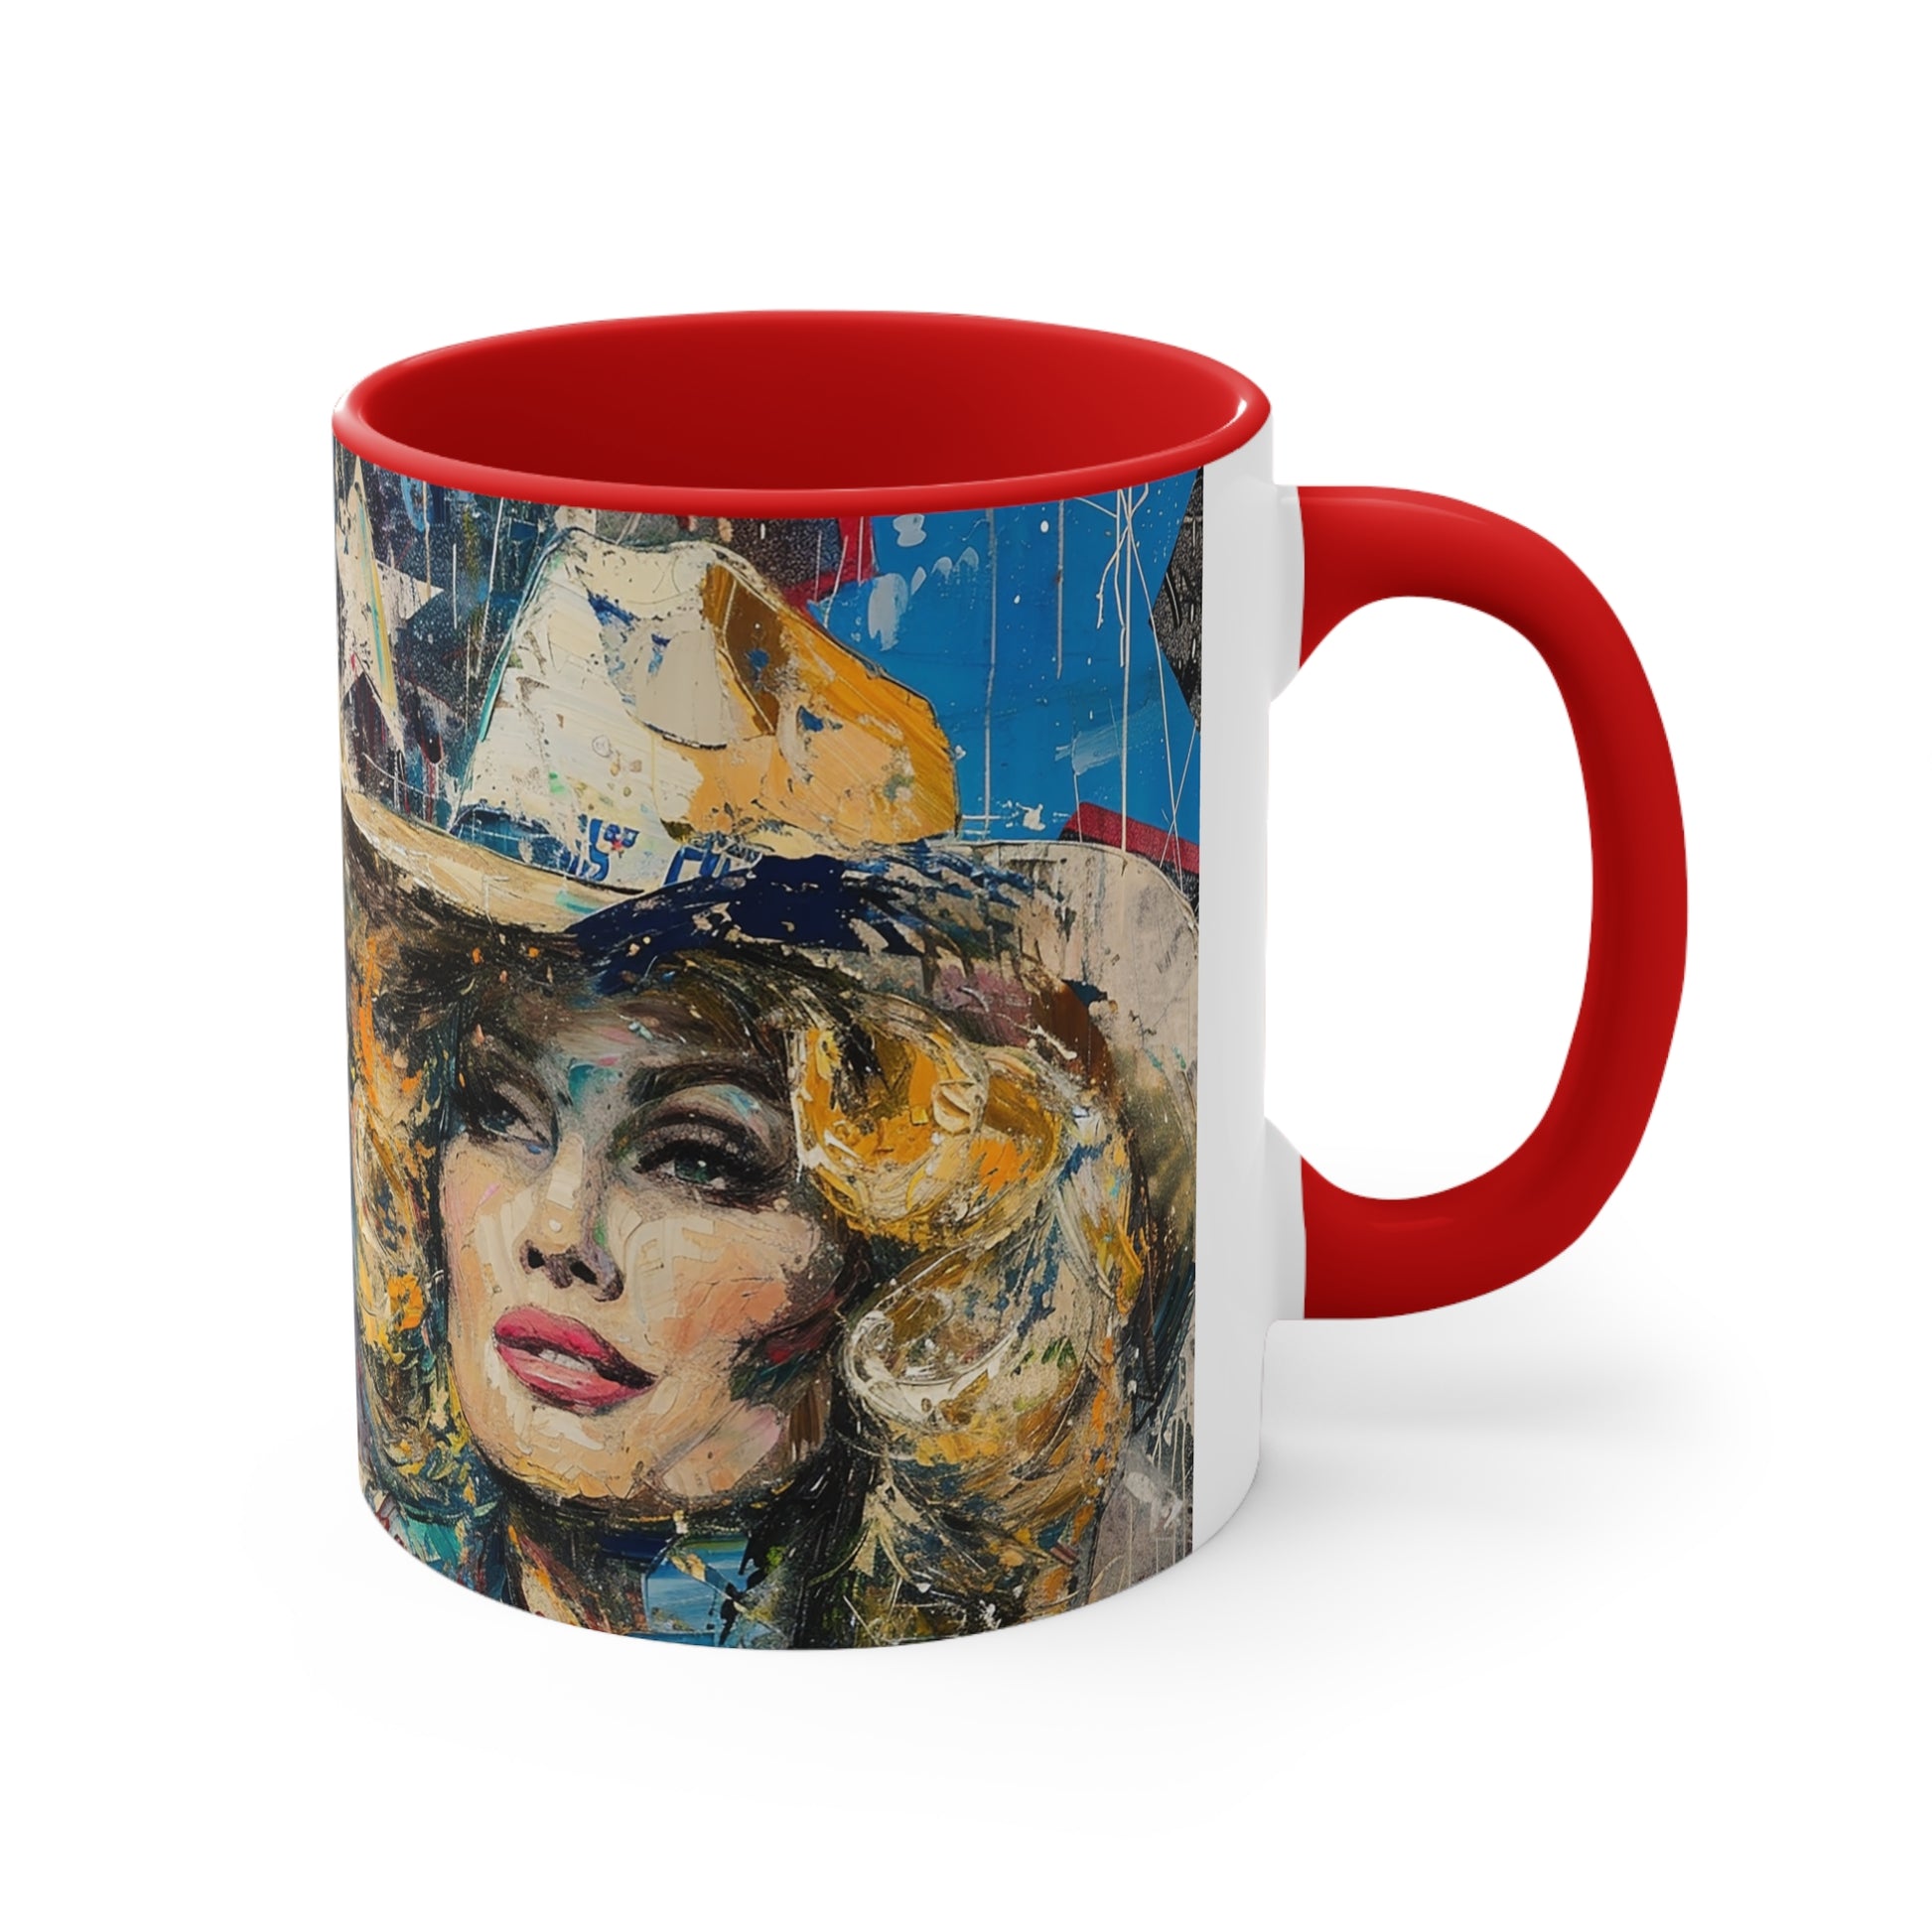 Accent Coffee Mug, 11oz - Country Queen red side